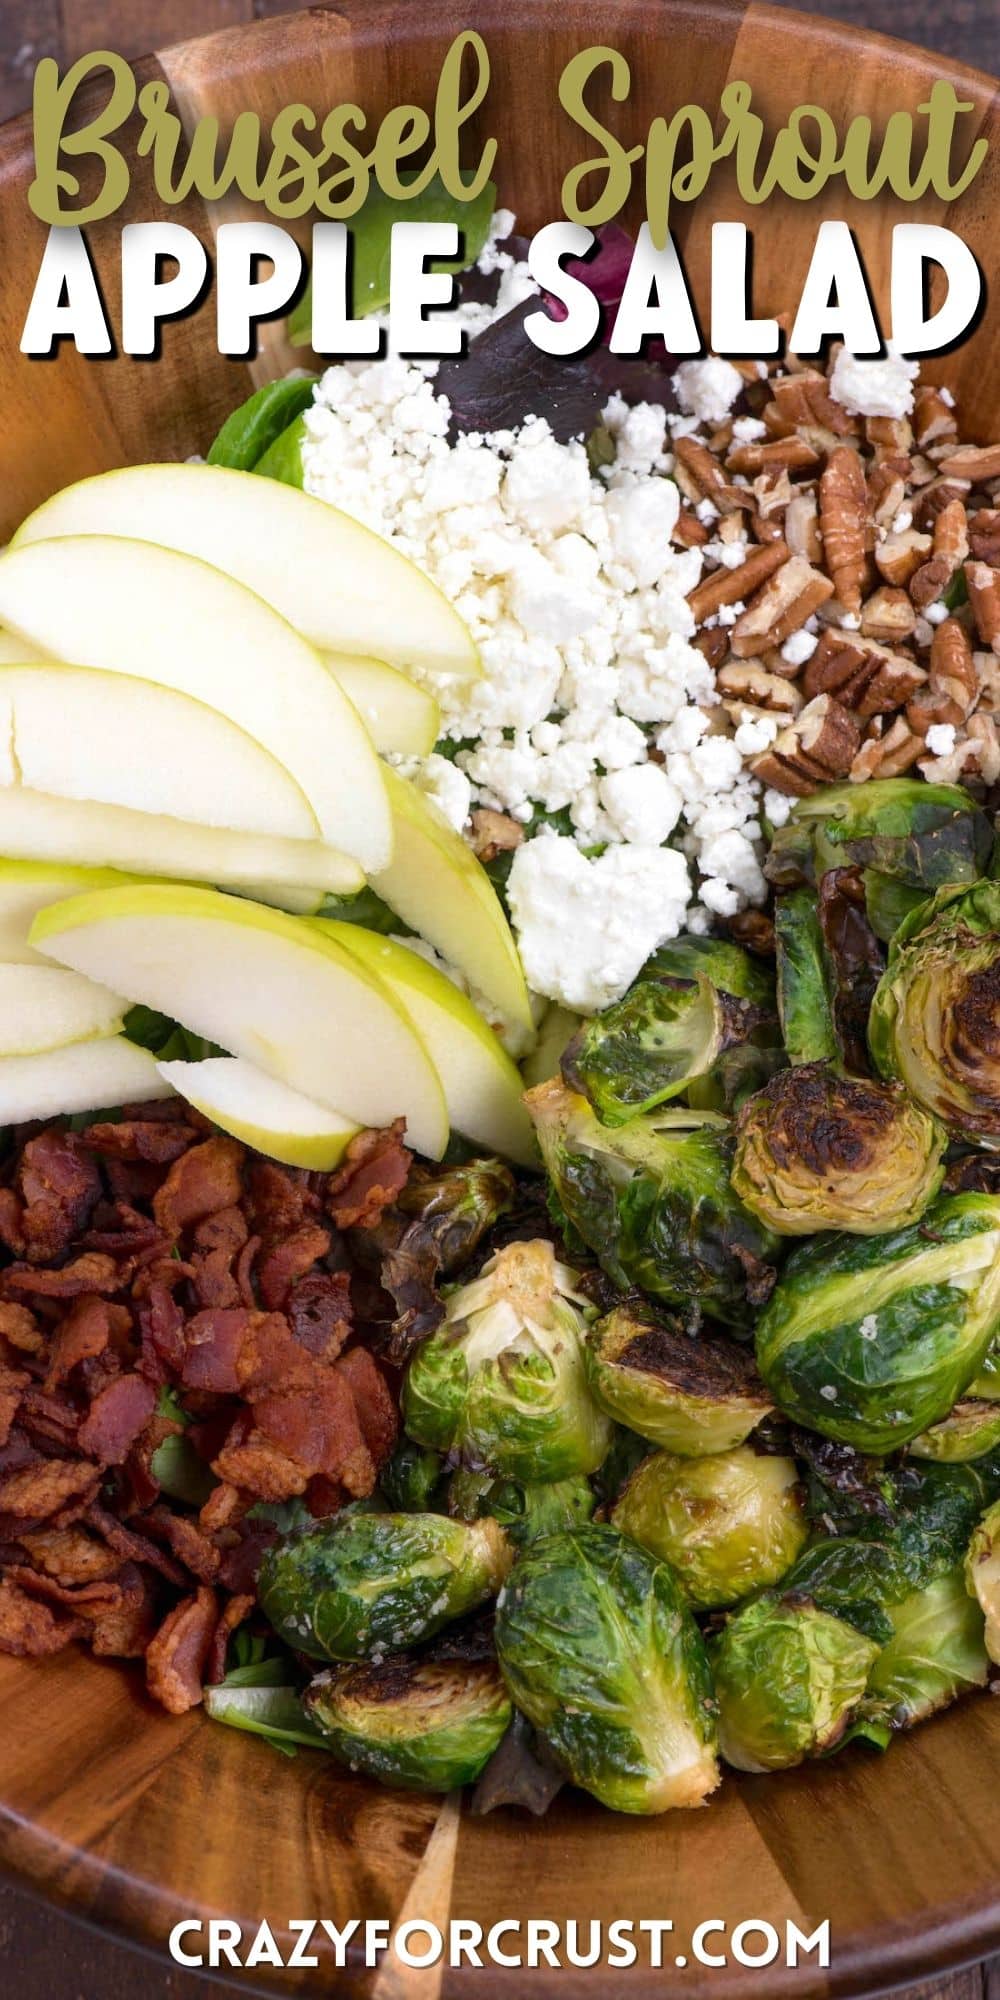 brussel sprout salad with all the ingredients including apples, Brussel sprouts, cheese, and bacon separated in a wooden bowl with words on the photo